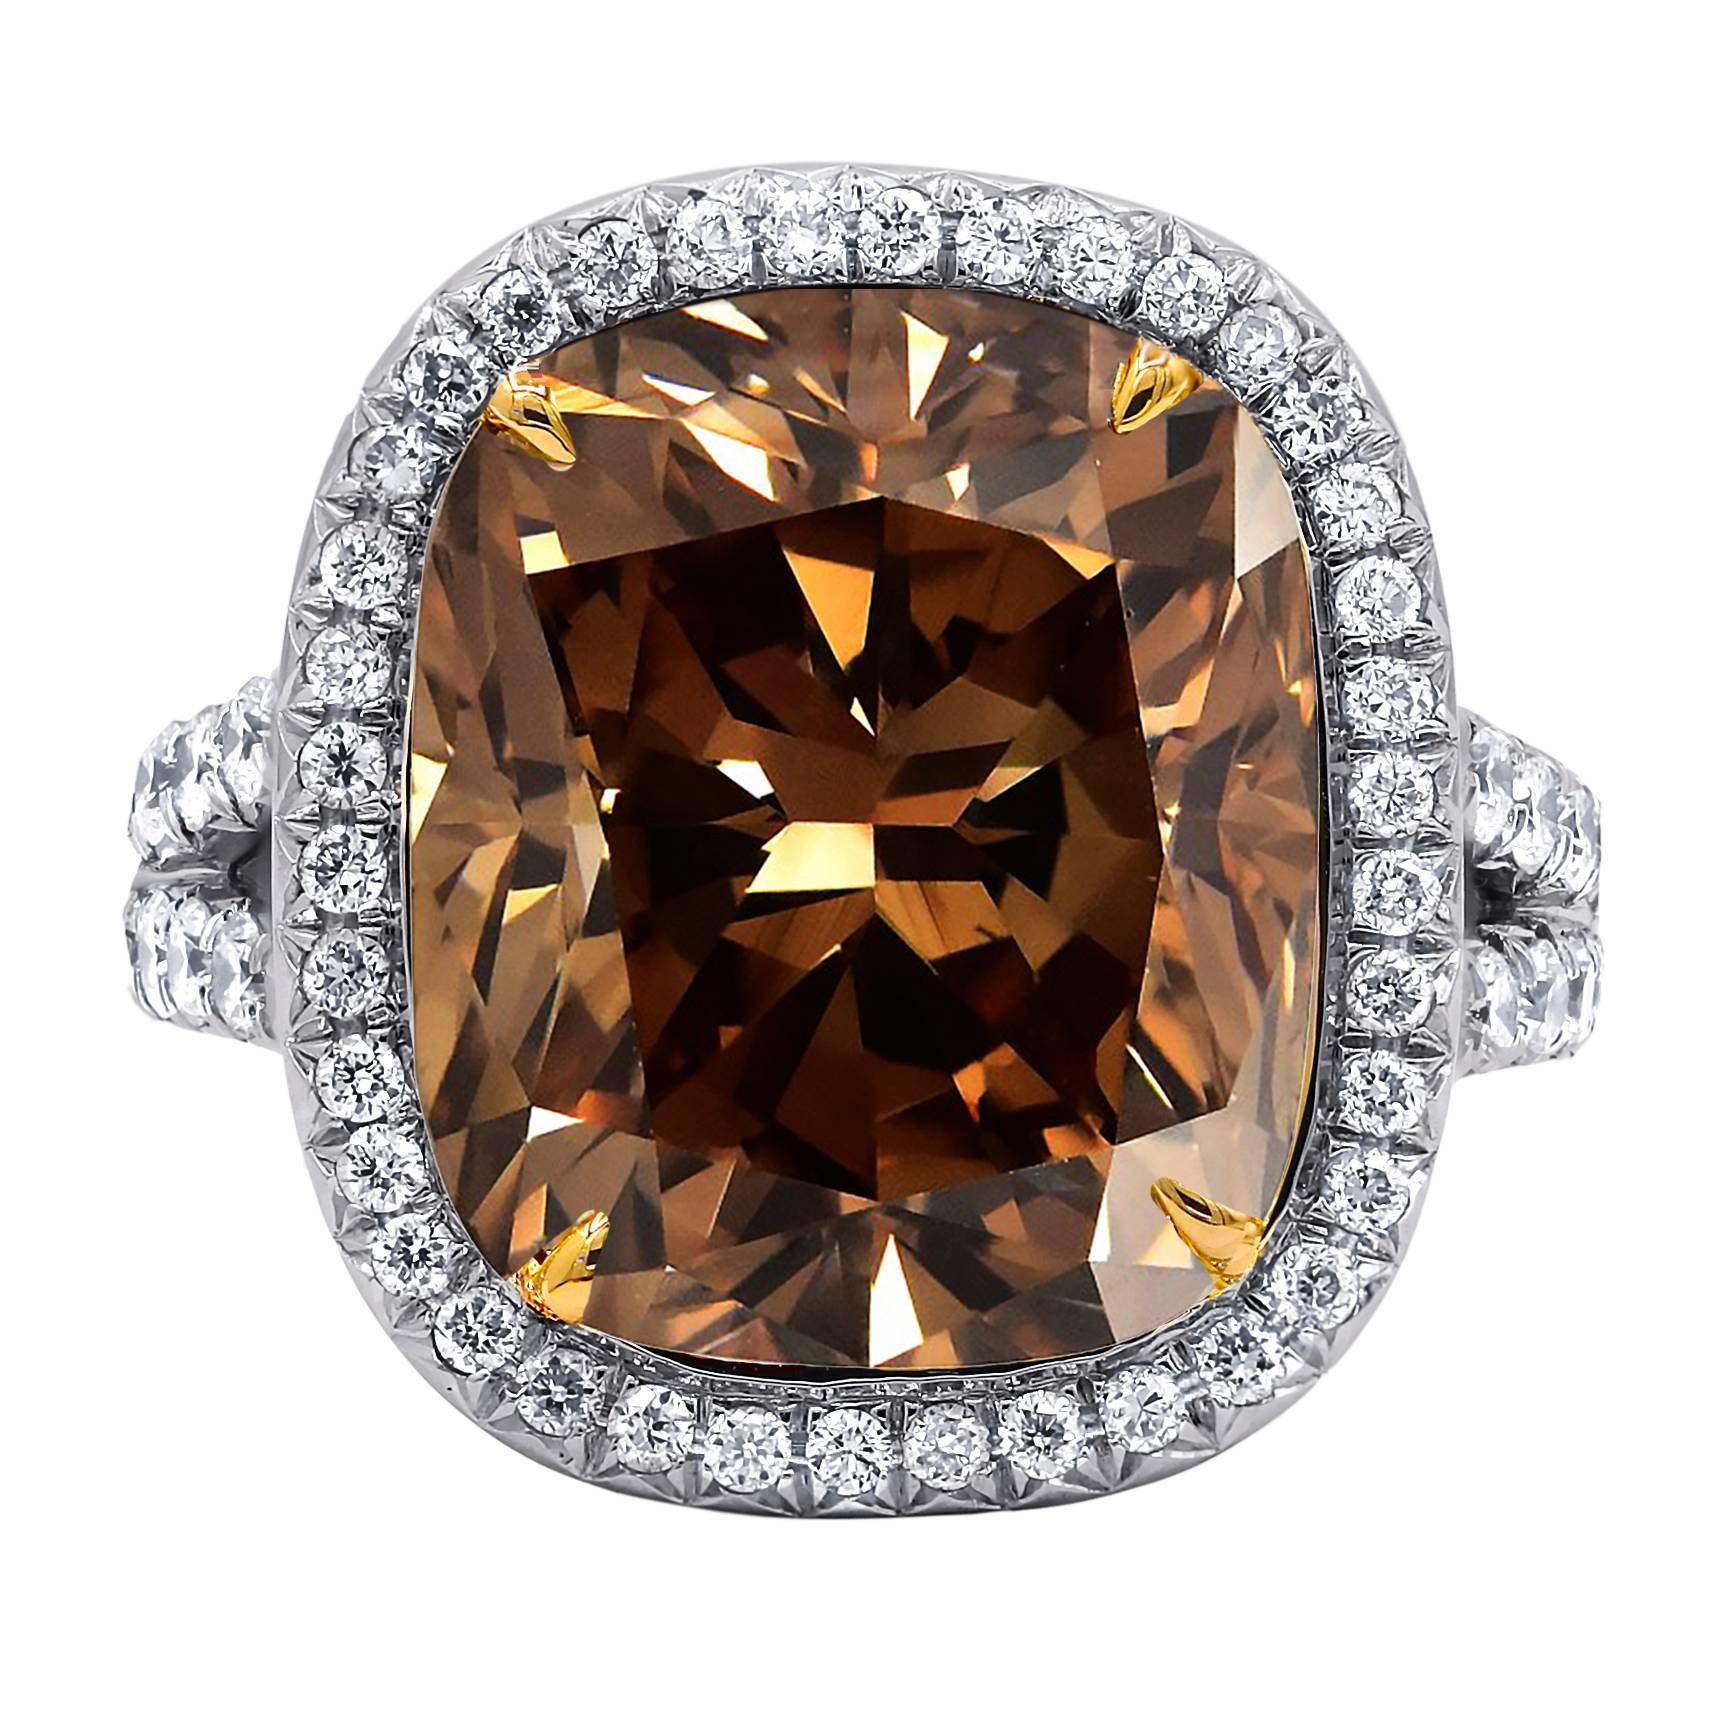 10.30 Carat GIA Certified Fancy Brown Diamond Ring For Sale